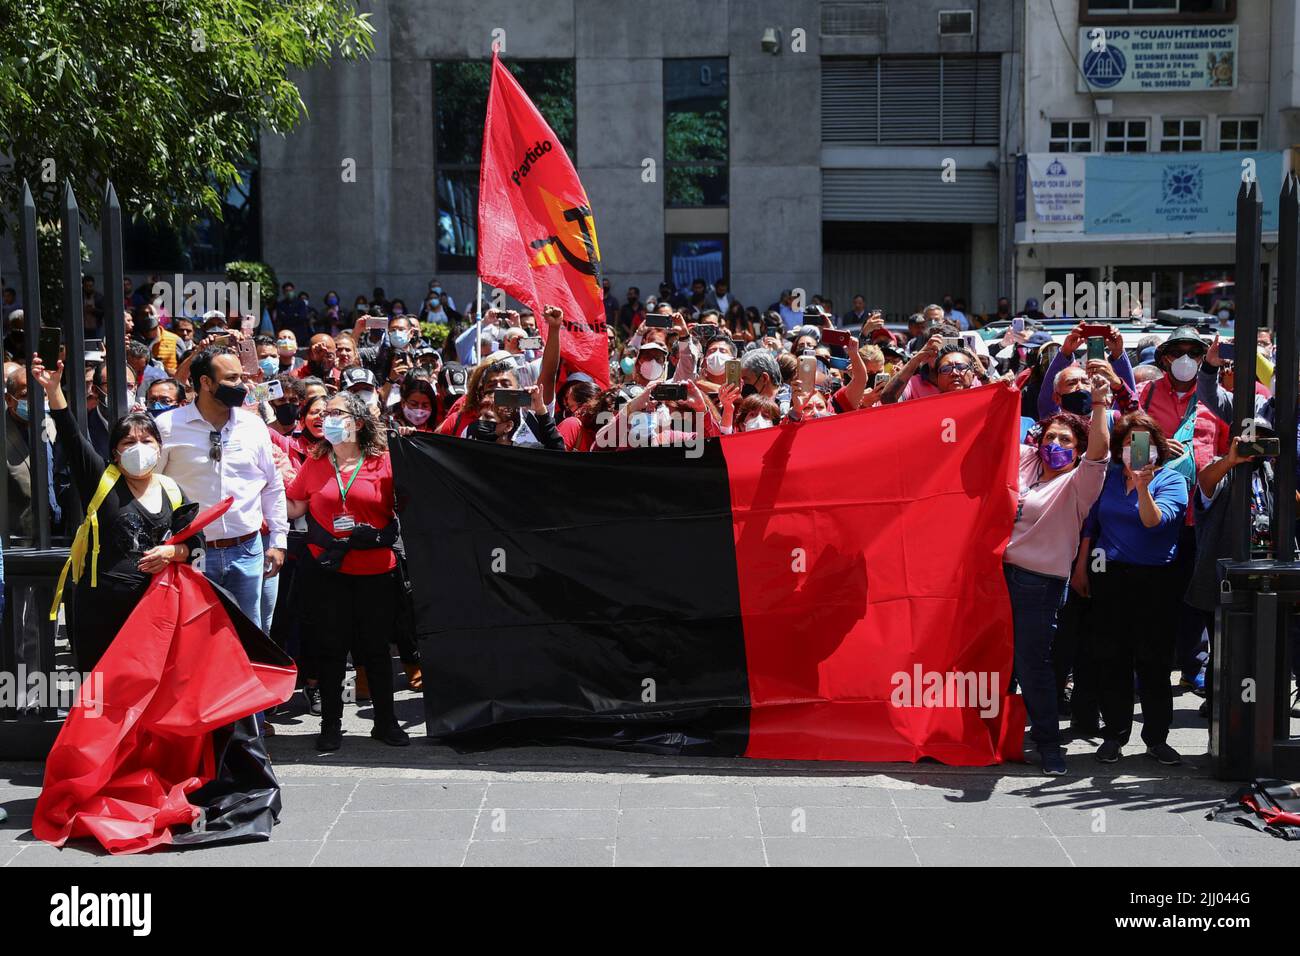 Employees hold a flag as they protest outside the headquarters of Telmex after the company's union went on strike after failing to come to an agreement with the company over a new collective labour agreement, in Mexico City, Mexico, July 21, 2022. REUTERS/Edgard Garrido Stock Photo